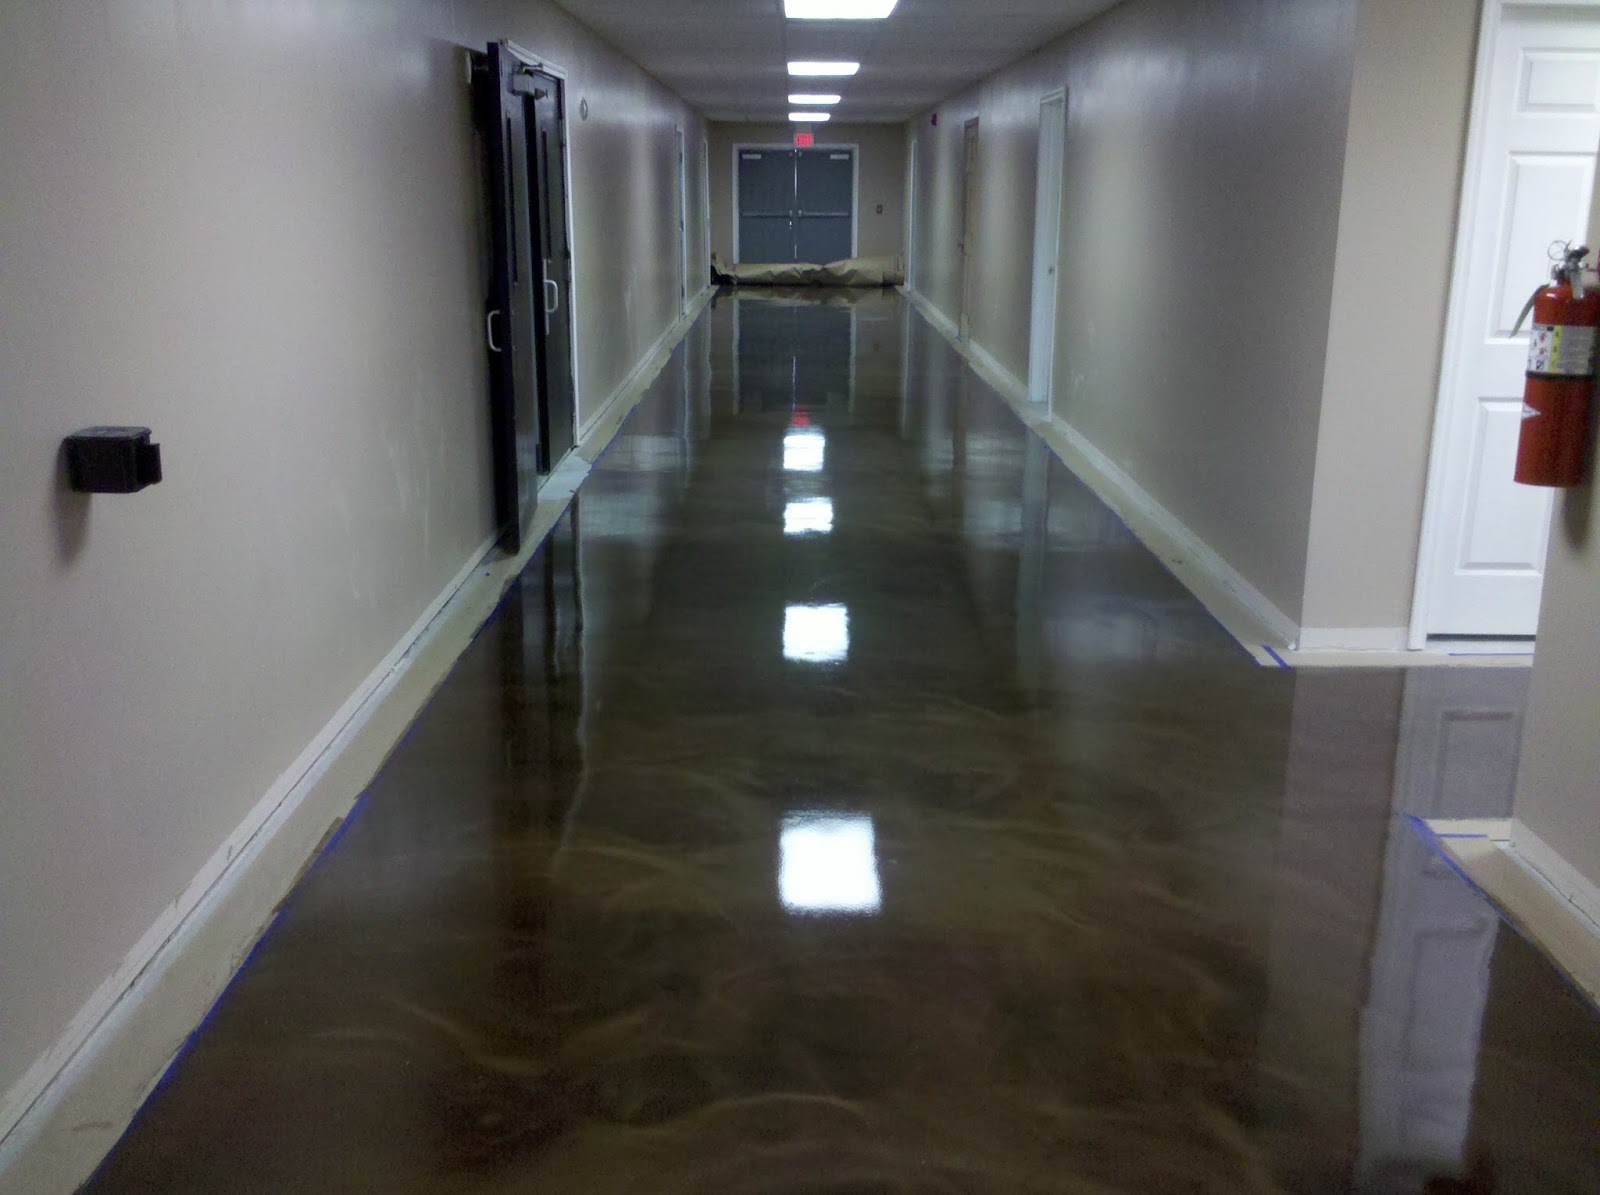 Commercial Epoxy Flooring - Canadian Pros Painting: Trusted Calgary